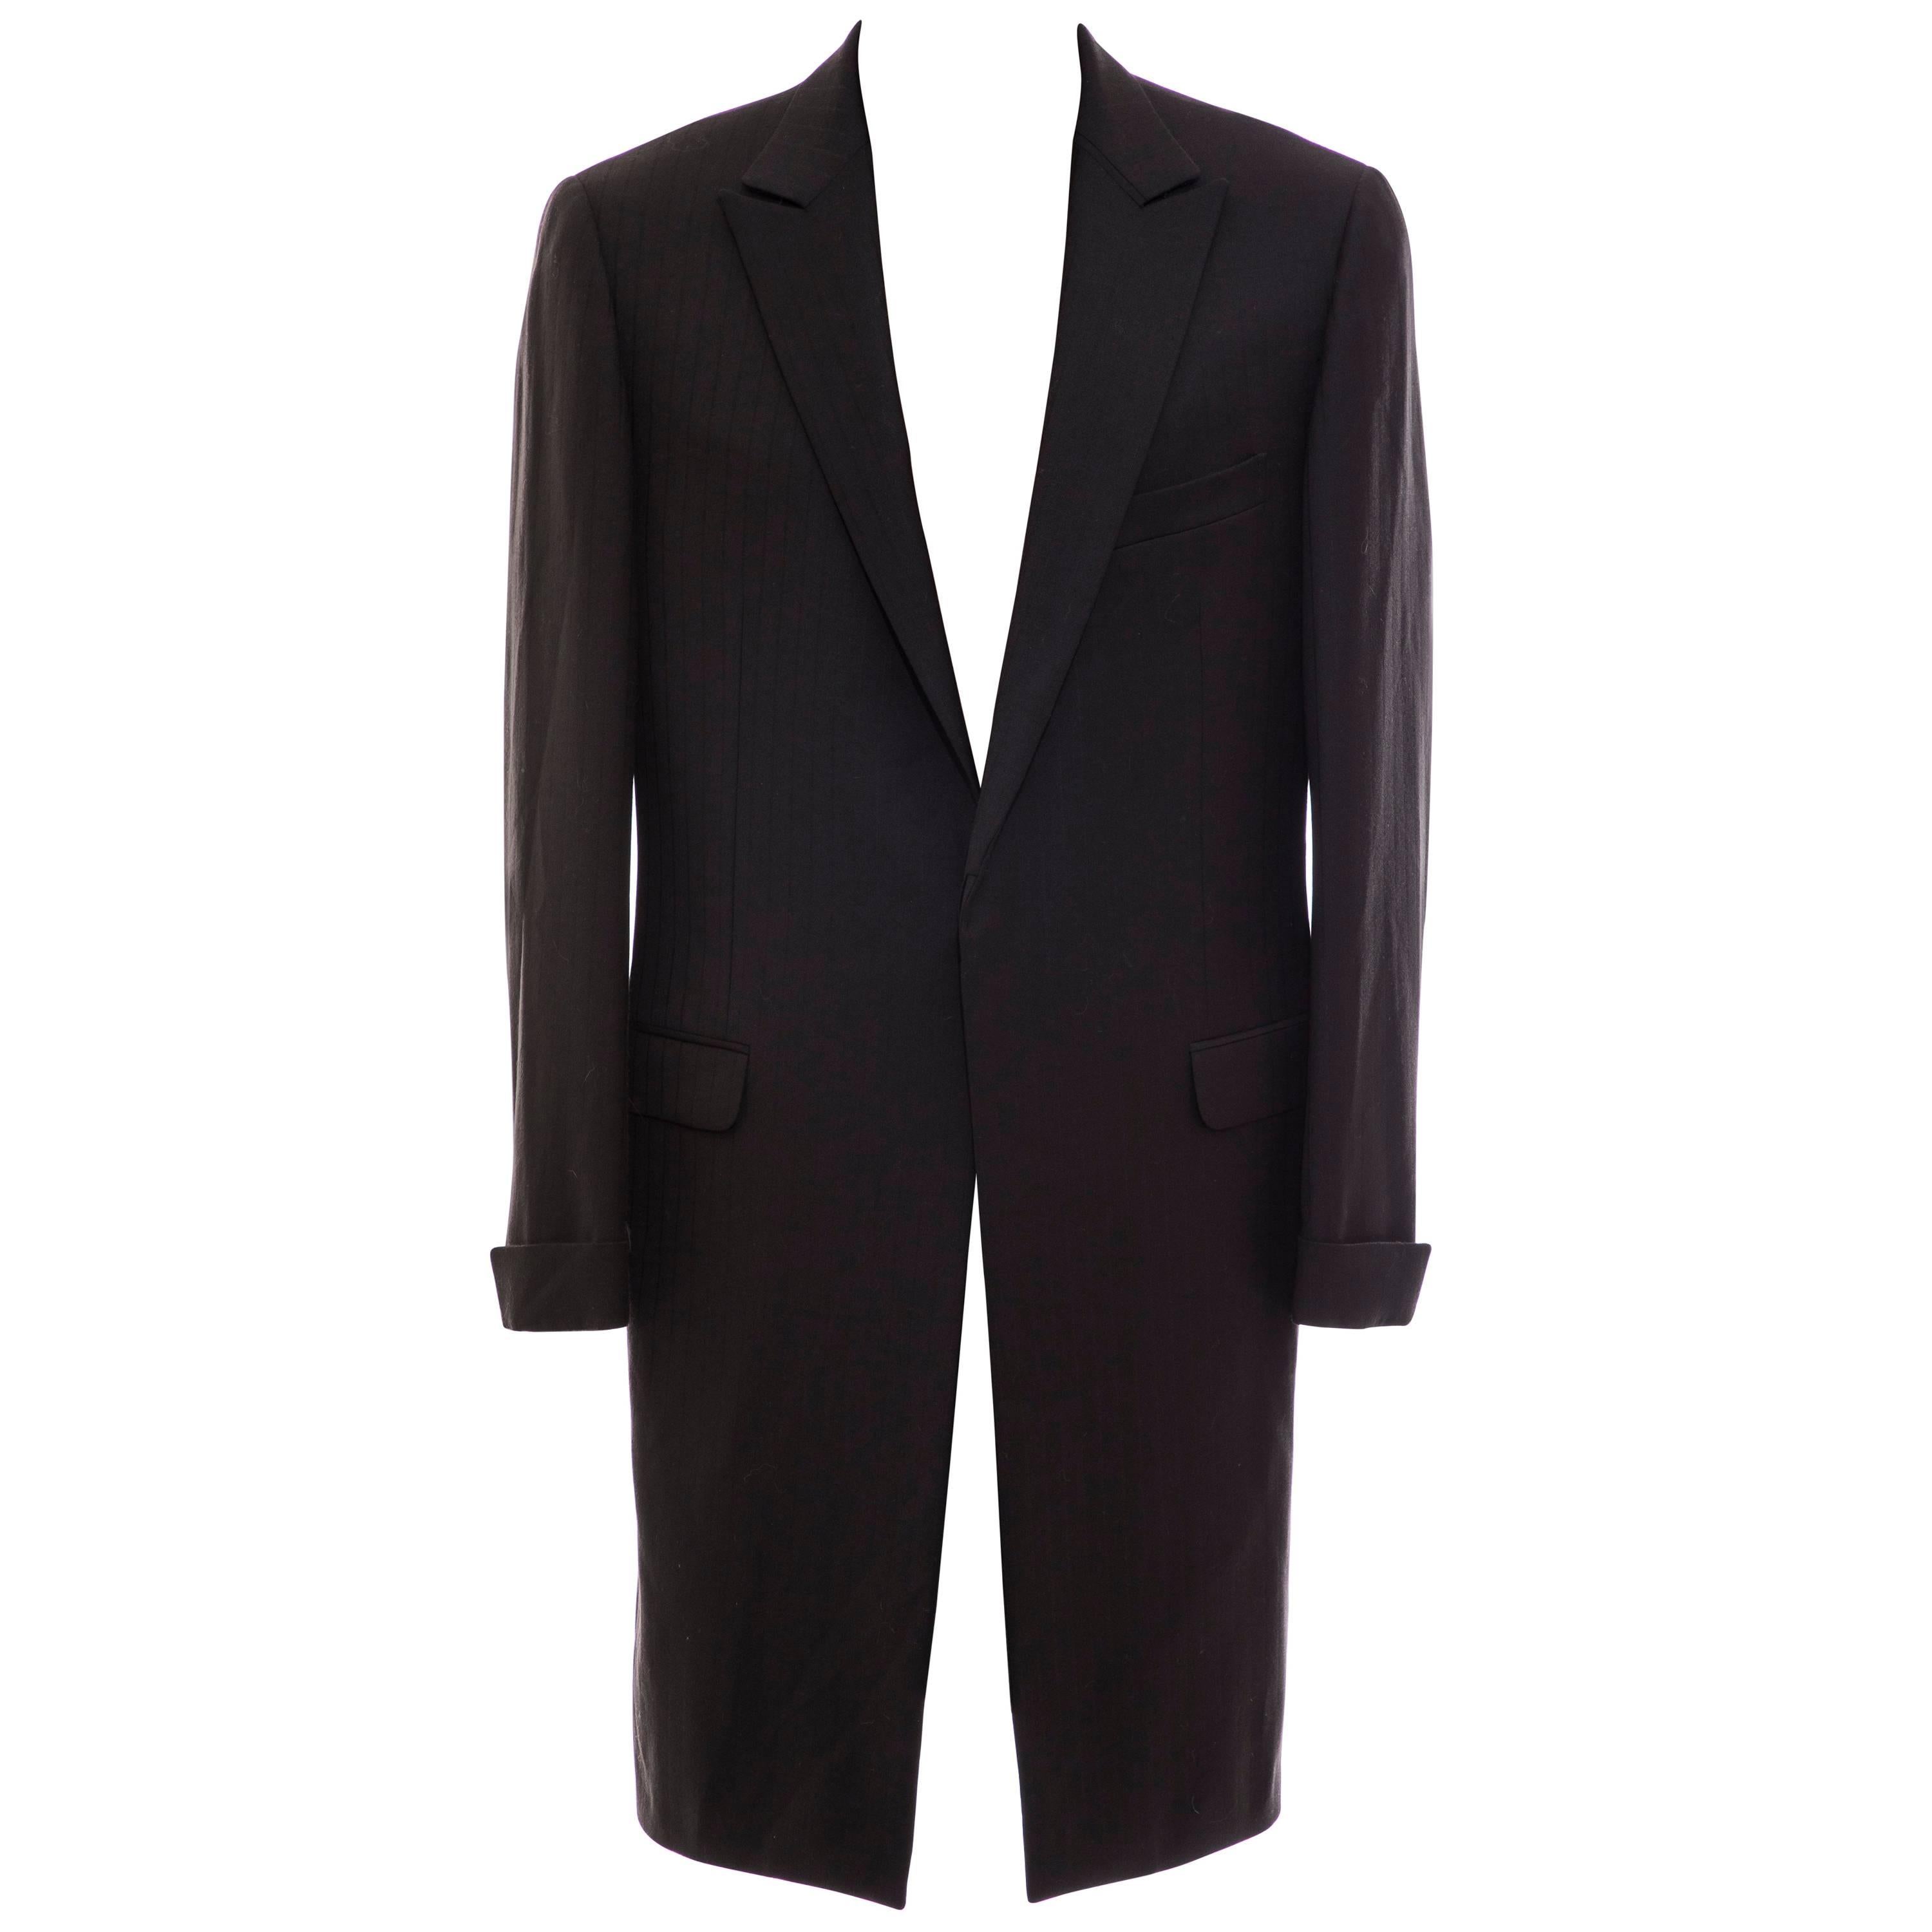 Gianni Versace Couture Men's Black Pinstriped Wool Overcoat, Circa 1990's For Sale